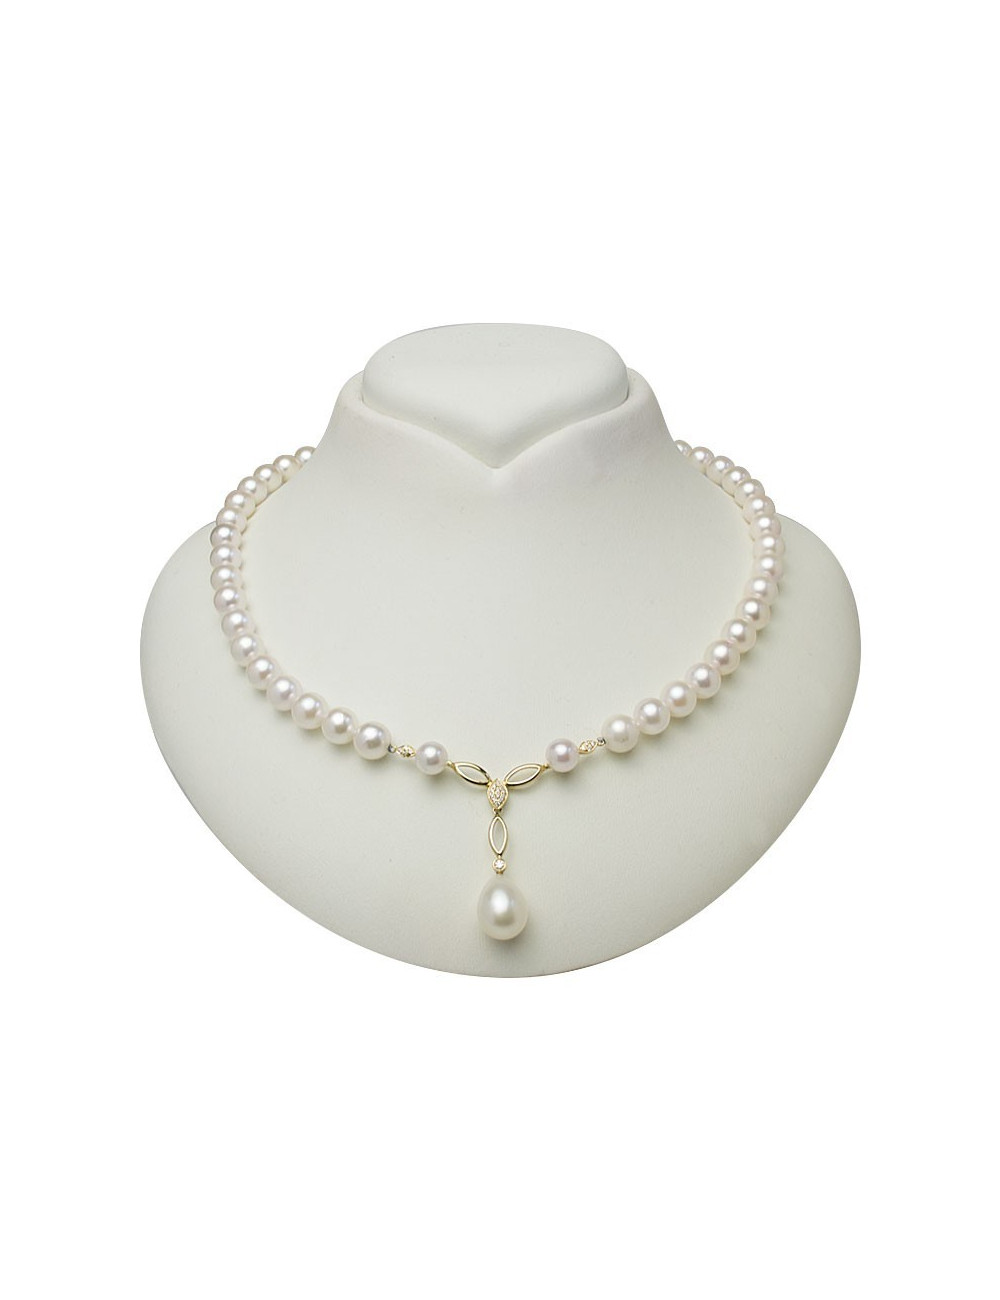 White Akoya pearl necklace with gold openwork pendant decorated with diamonds and large freshwater pearl NM6580G